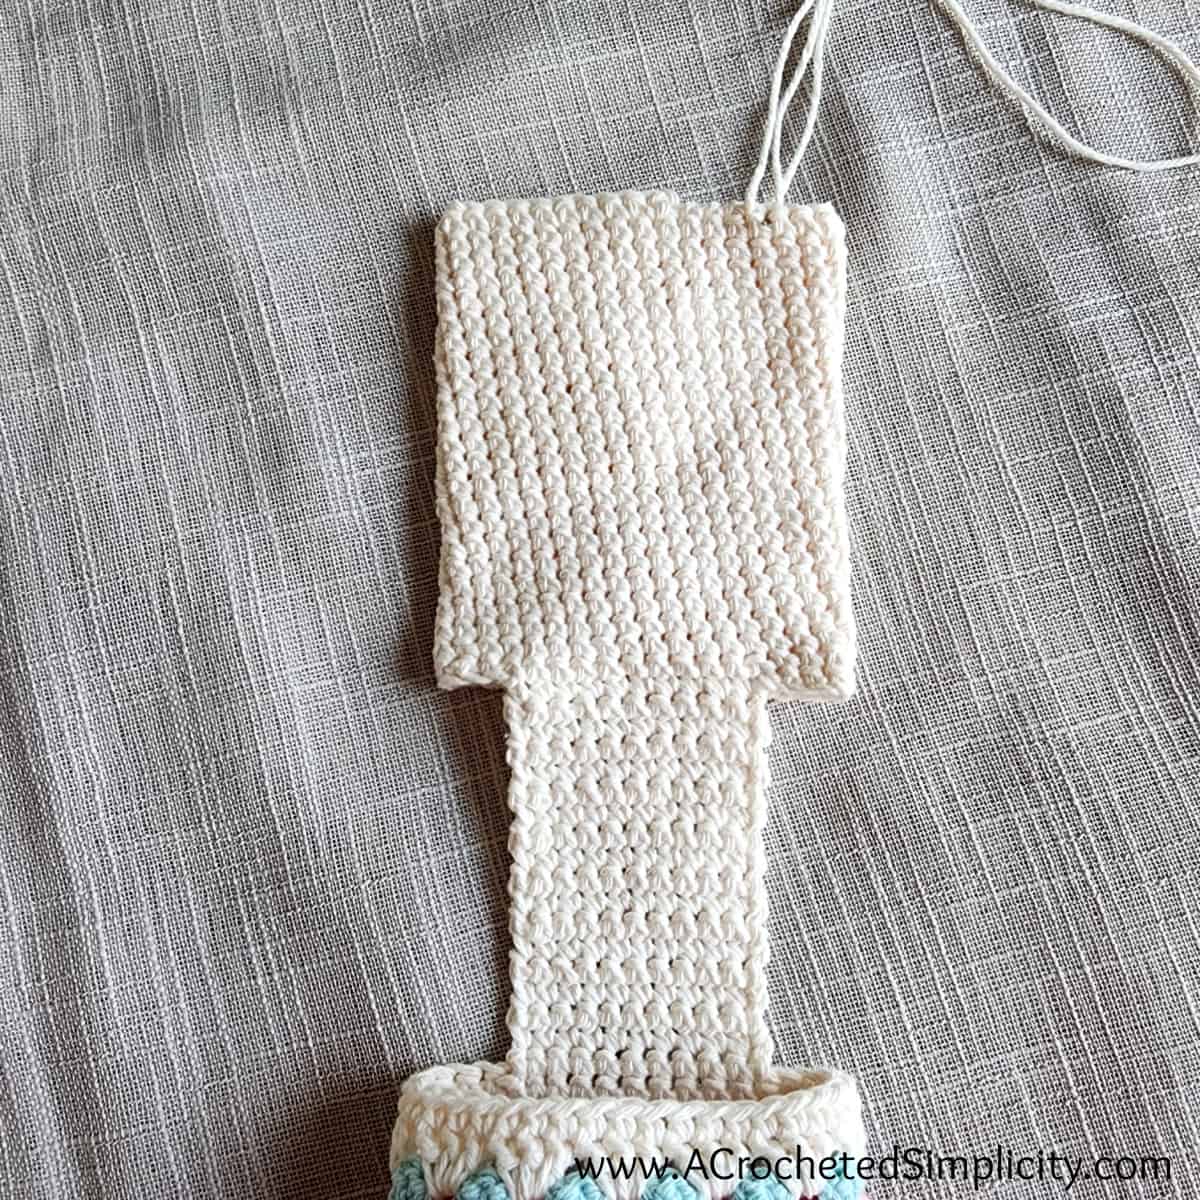 Cell phone pouch on a crochet chair caddy being sewn closed.